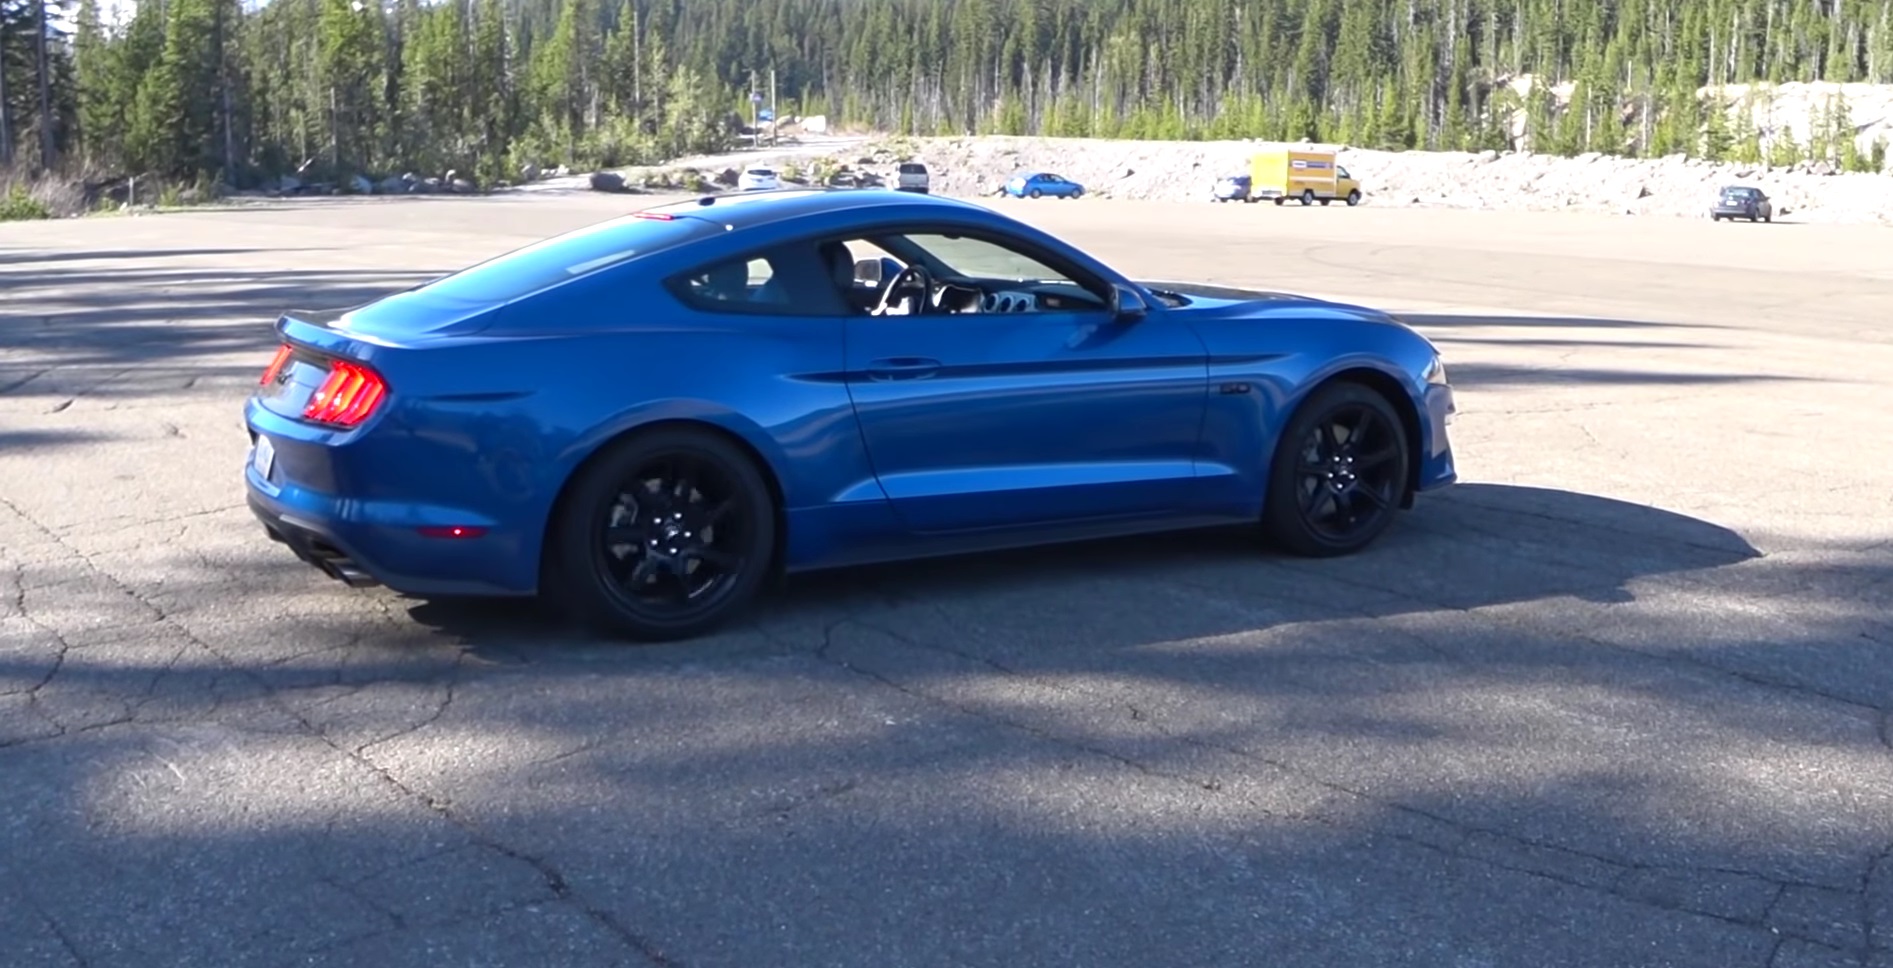 Video: 2018 Ford Mustang GT – Muscle Car Perfection?